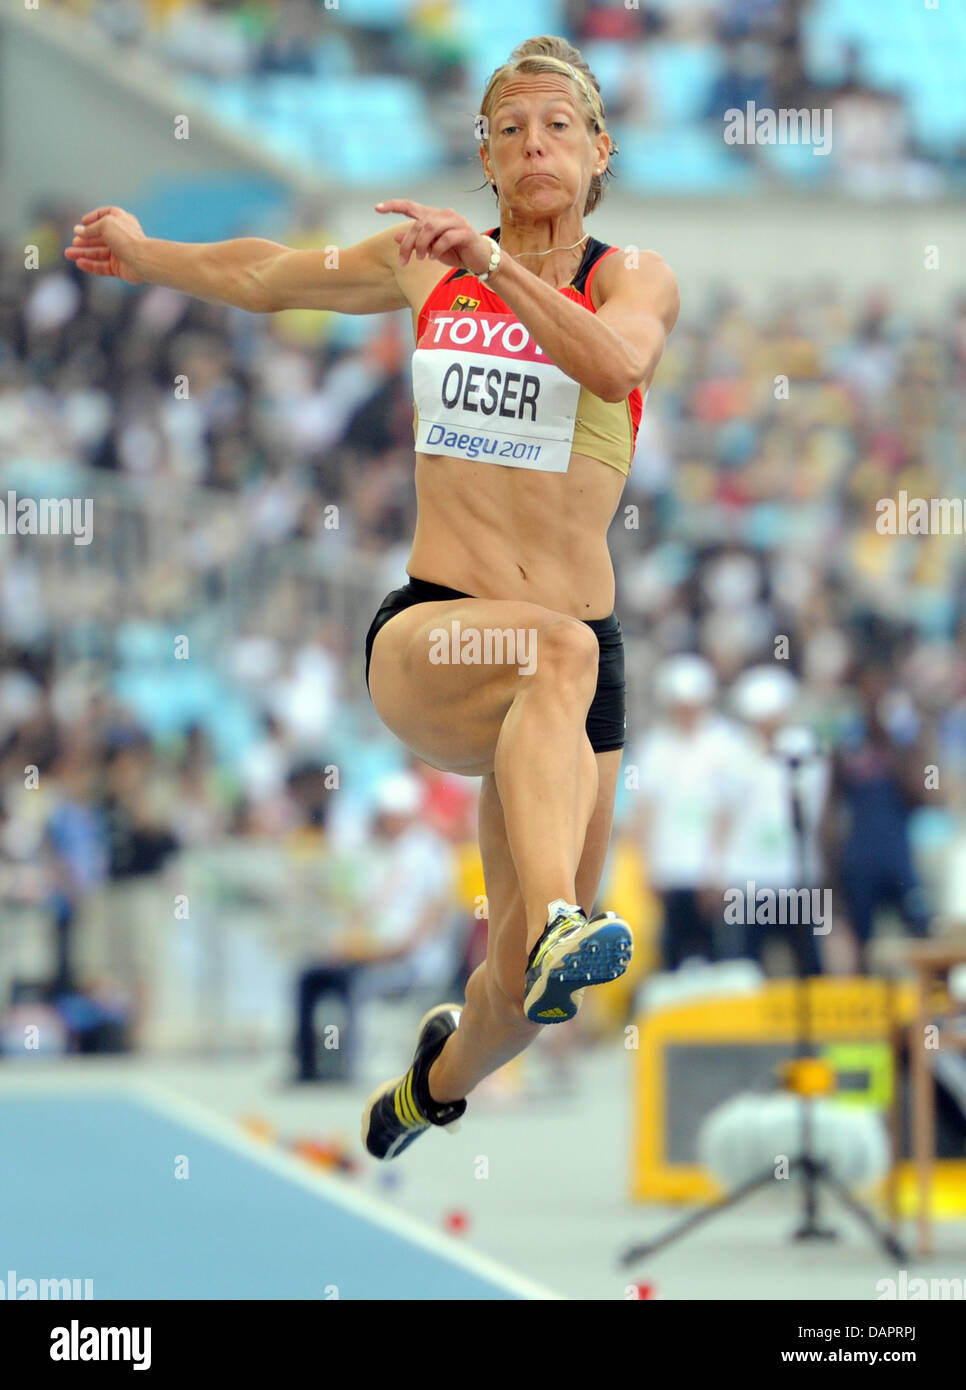 Jennifer Oeser of Germany competes in Long Jump Heptathlon at the 13th IAAF World Championships in Athletics, in Daegu, Republic of Korea, 30 August 2011. Photo: Rainer Jensen dpa Stock Photo